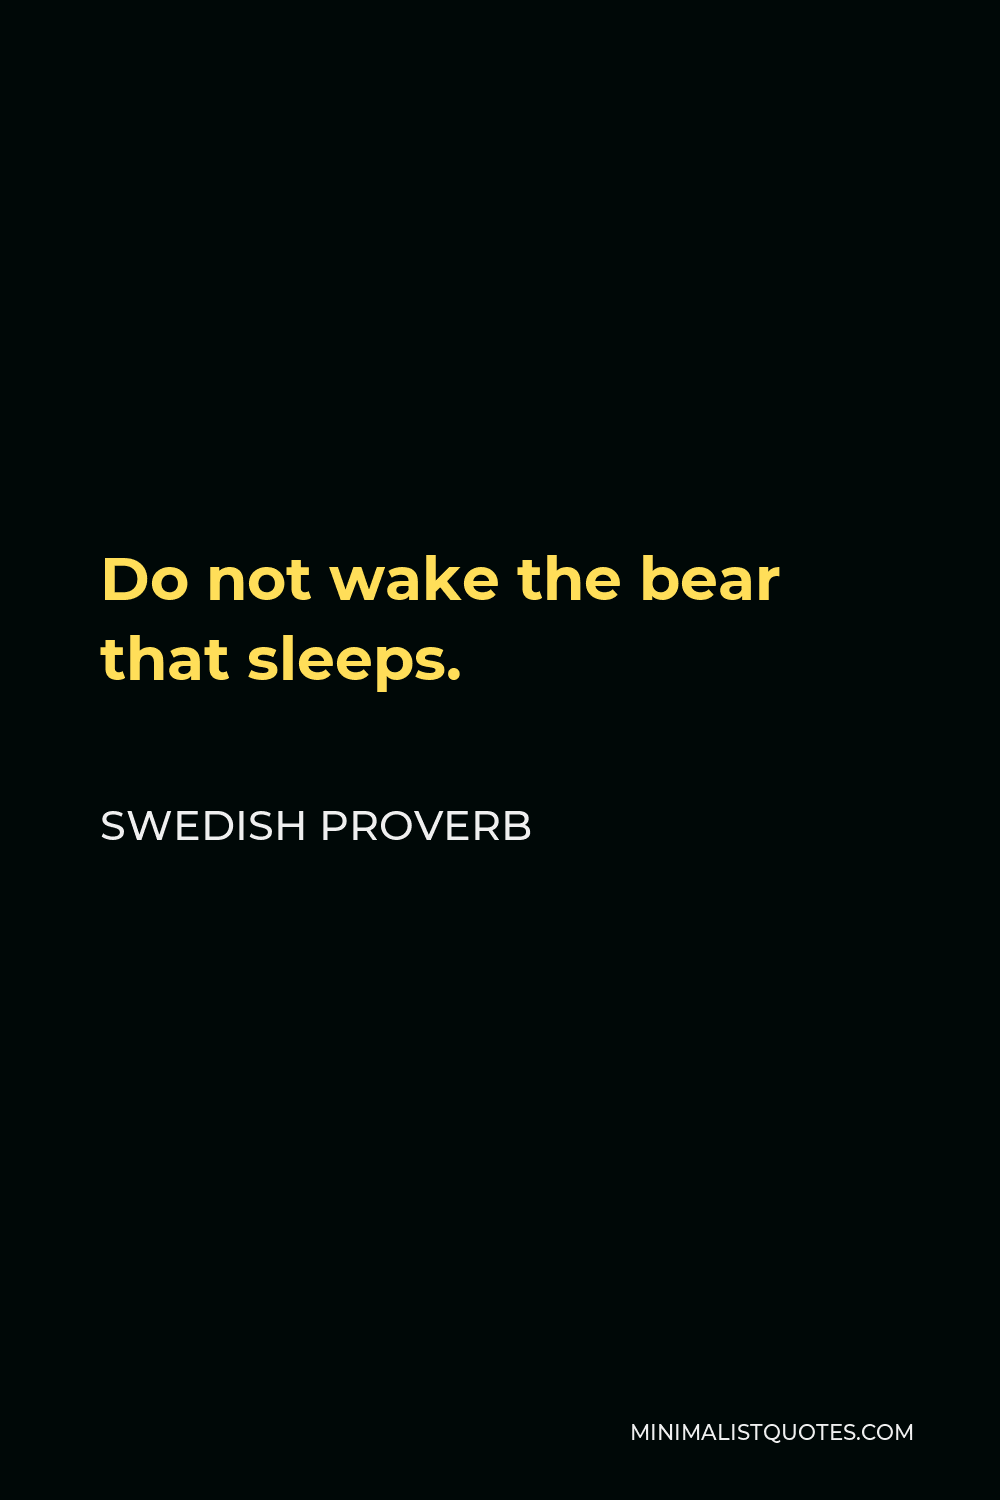 Swedish Proverb Quote - Do not wake the bear that sleeps.